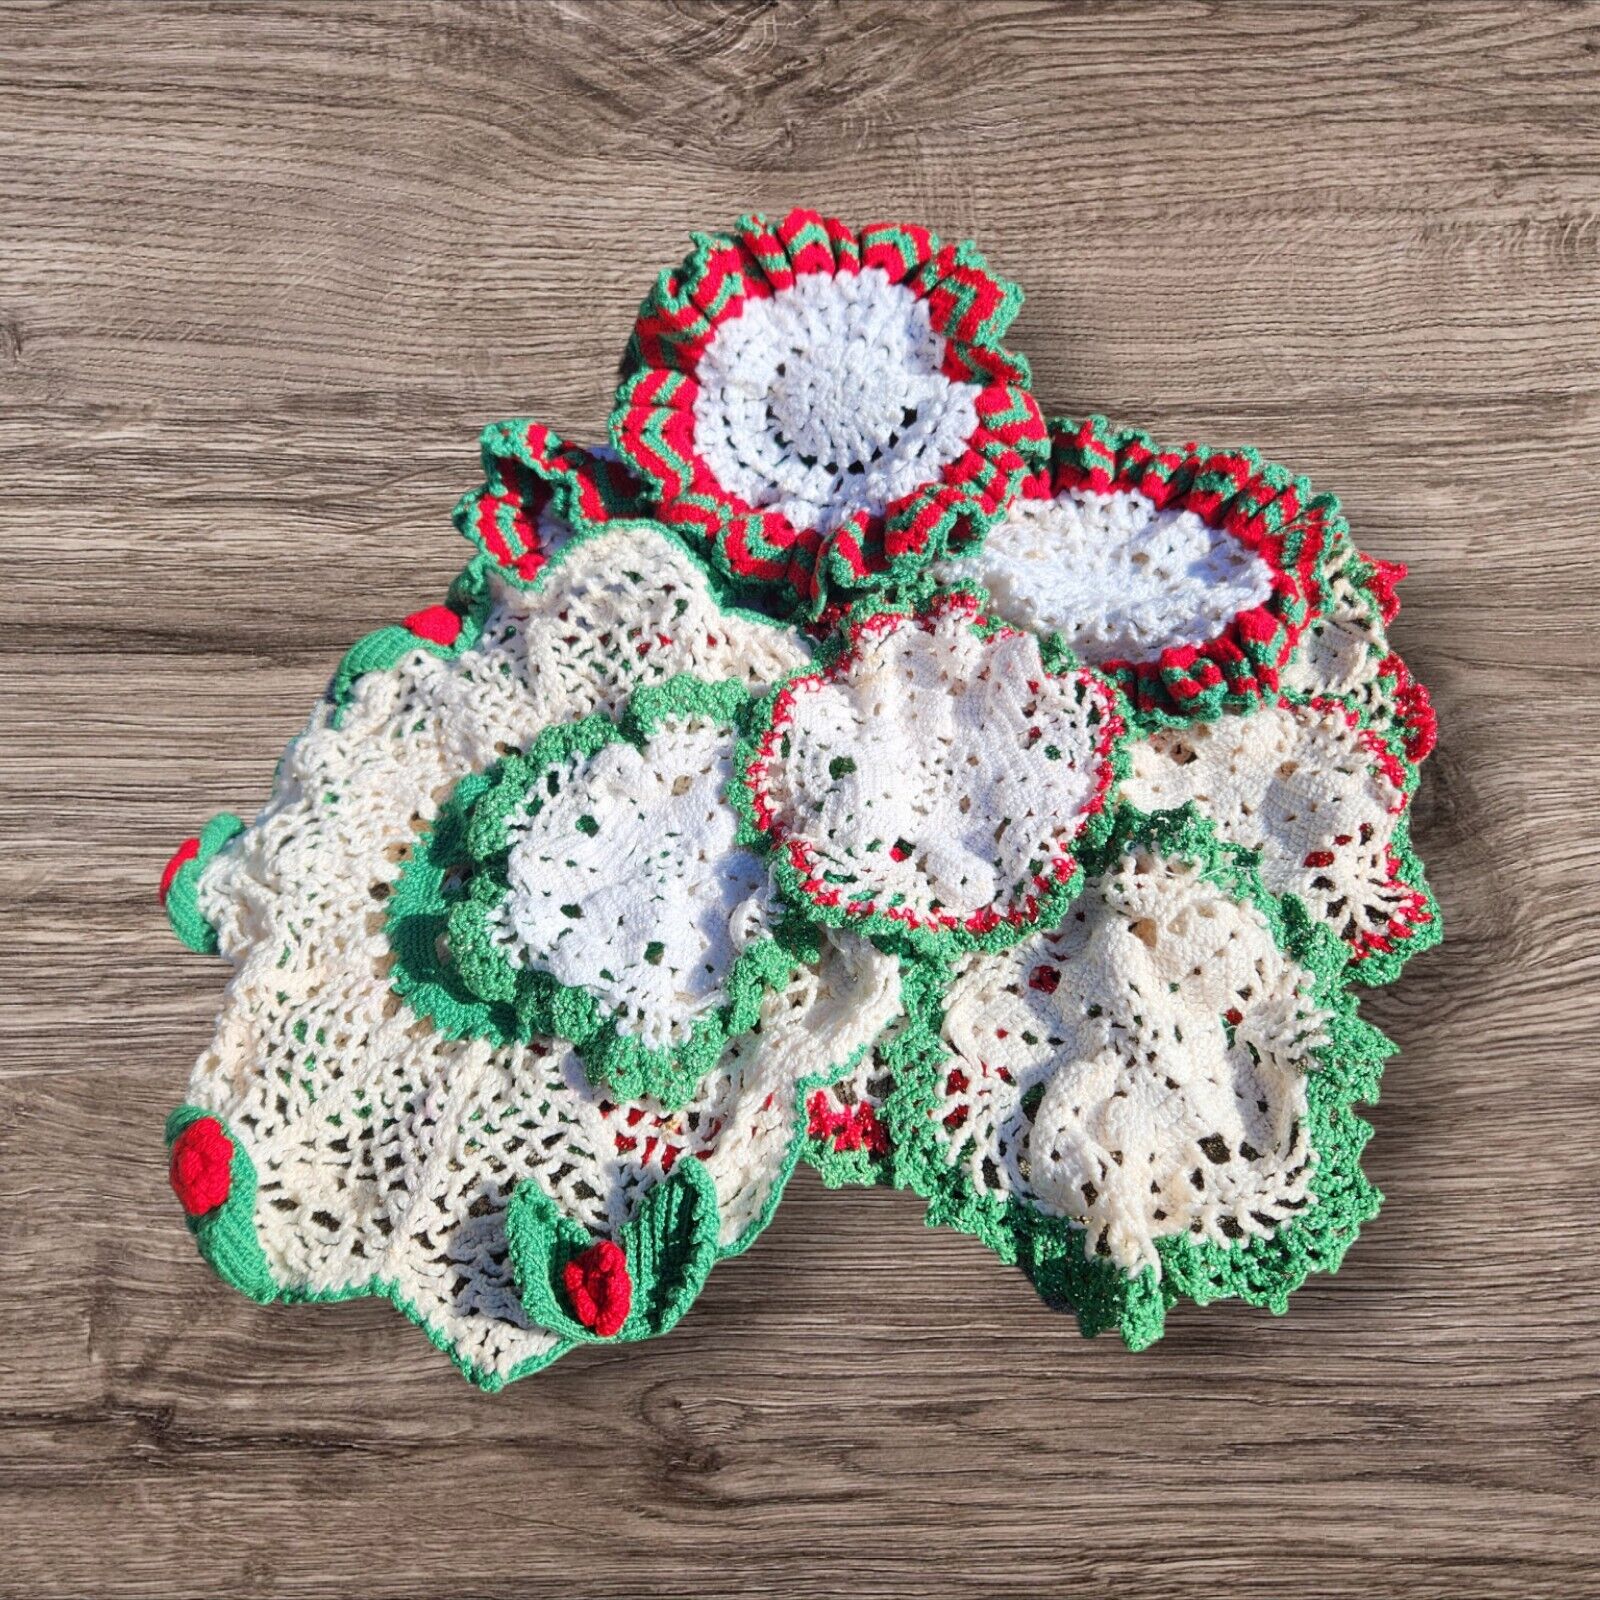 Lot of 11 VTG Hand Crochet Doilies Green and Red Various Sizes MCM Granny Core